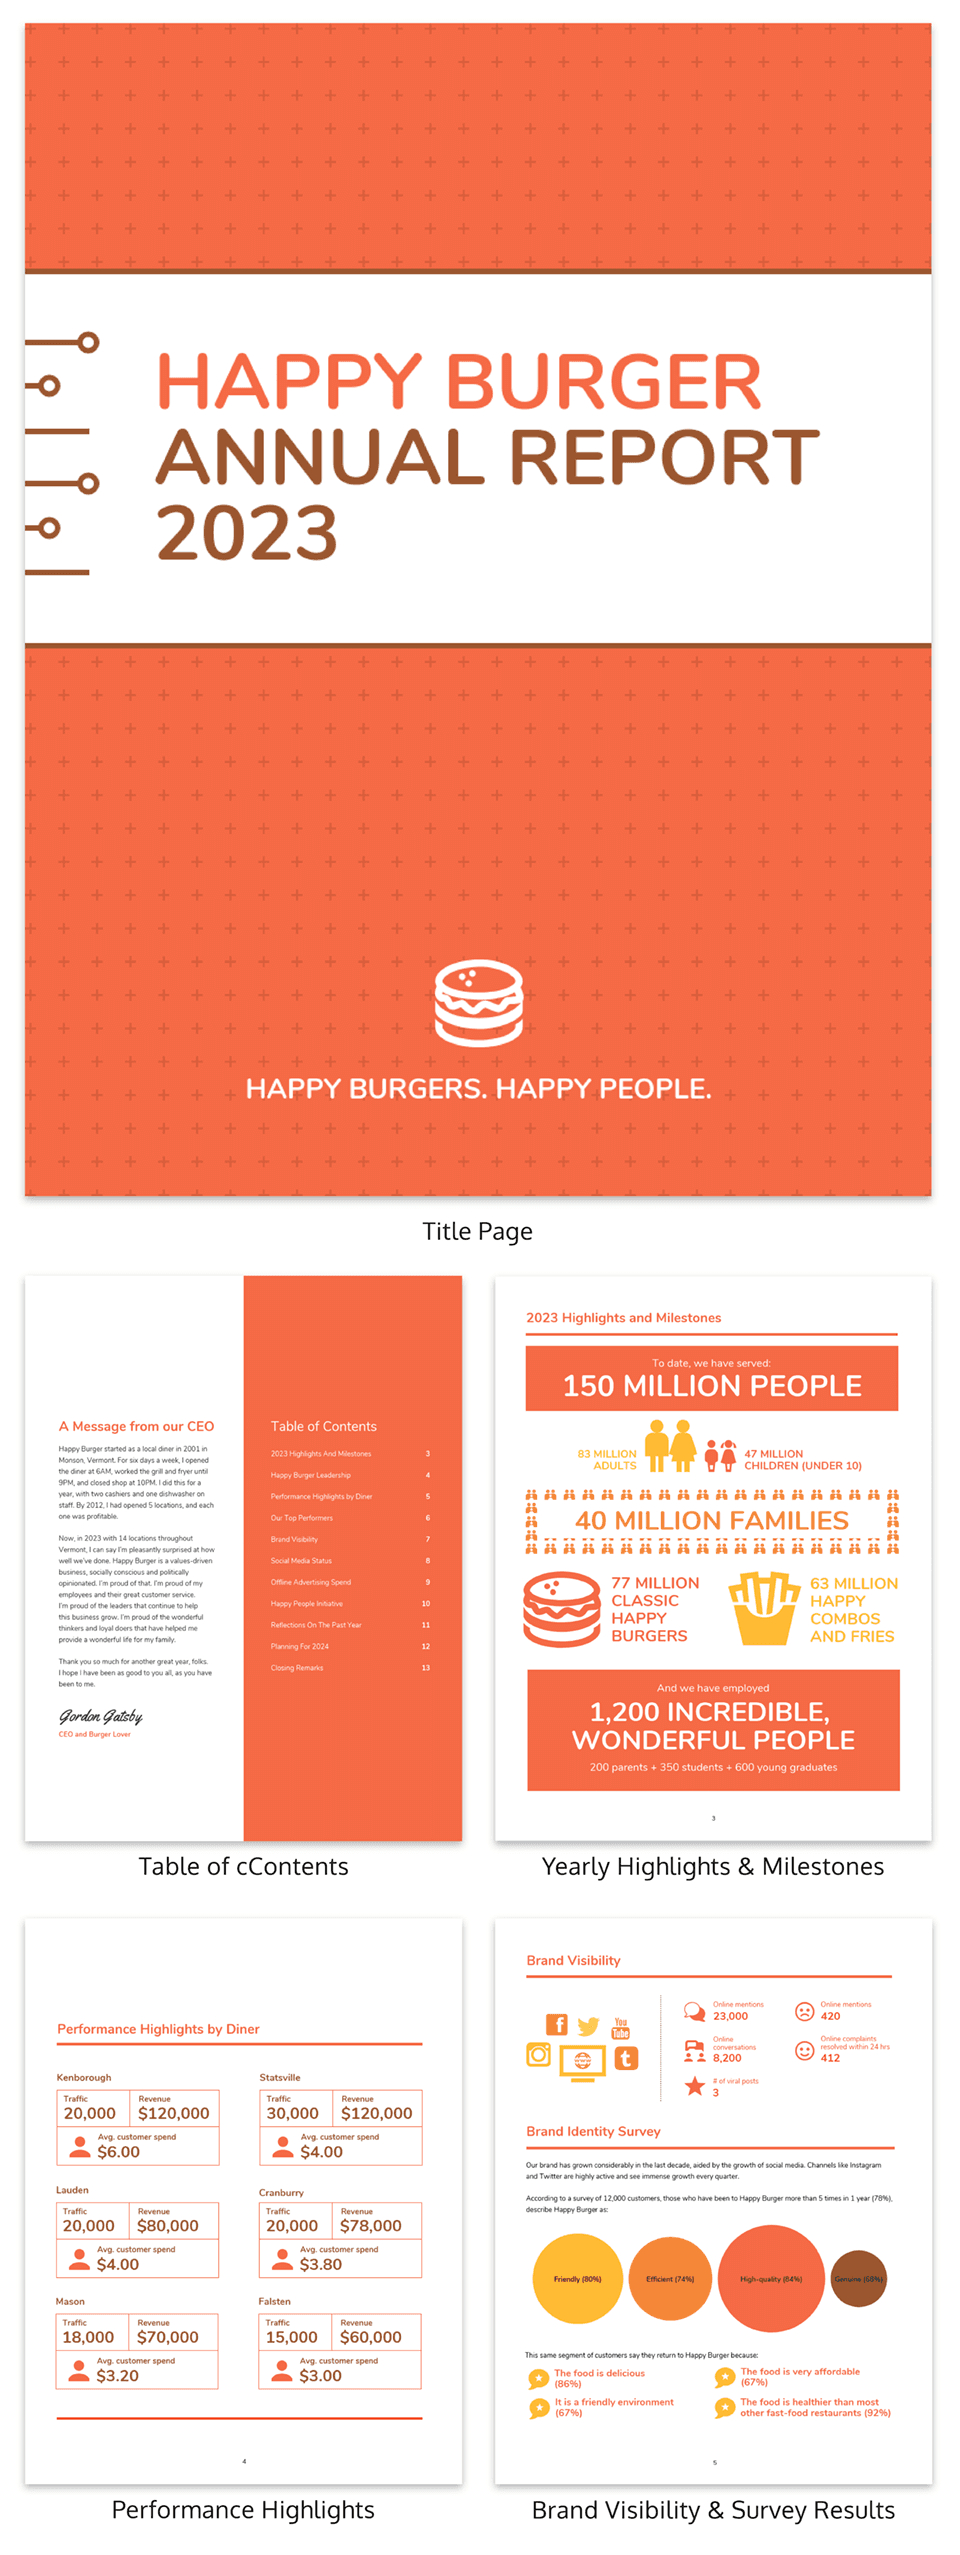 55+ Customizable Annual Report Design Templates, Examples & Tips With Annual Report Word Template